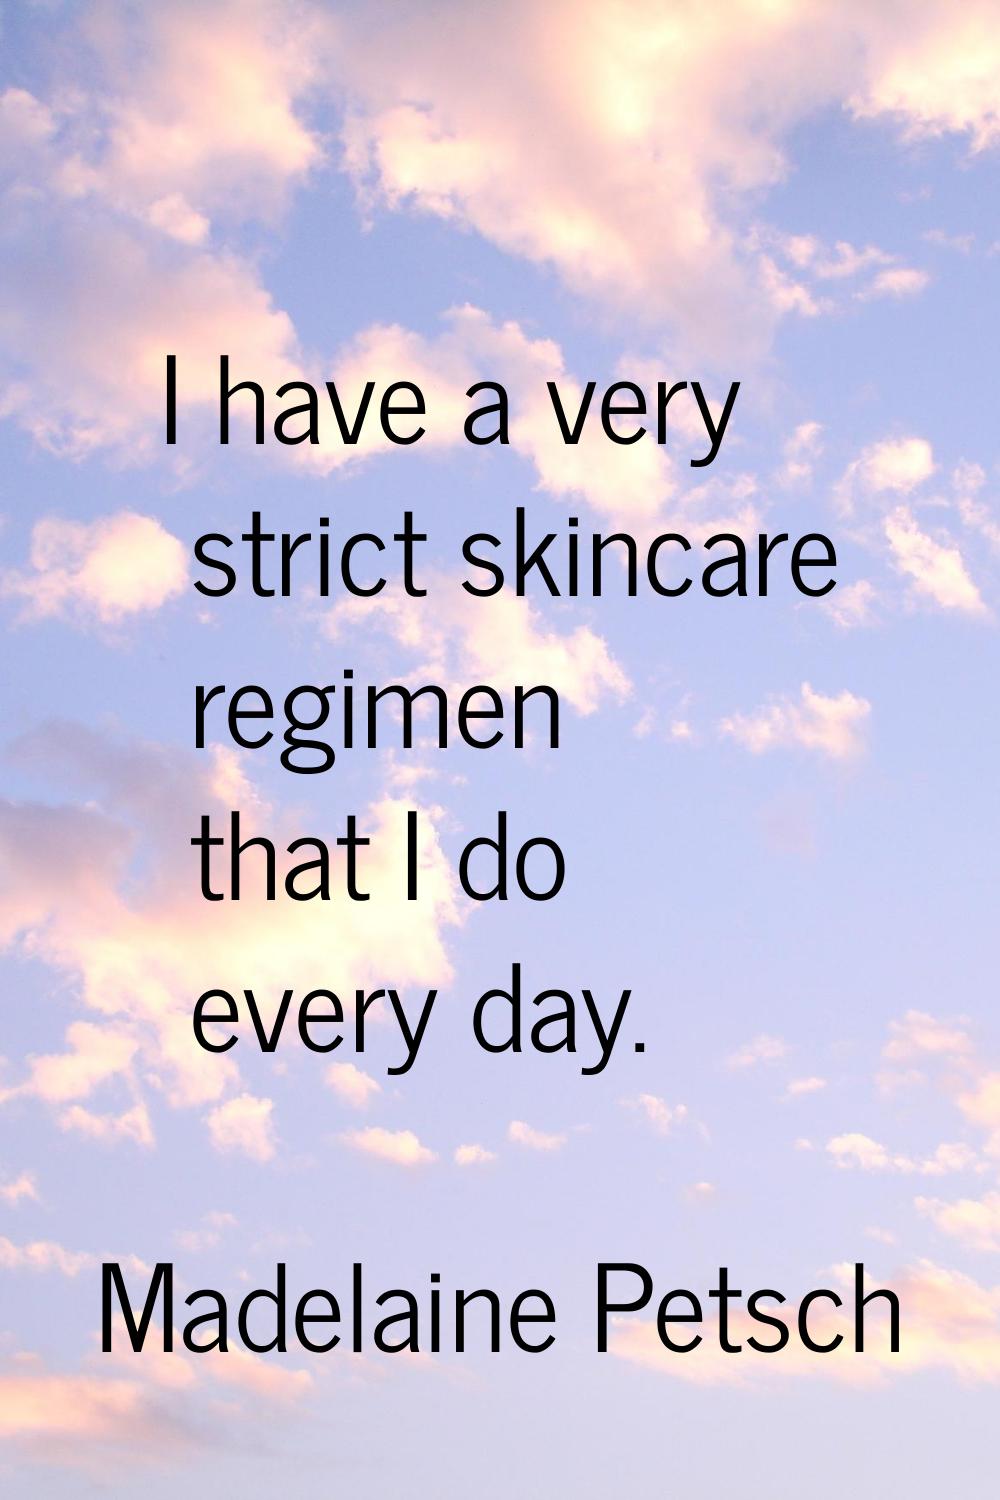 I have a very strict skincare regimen that I do every day.